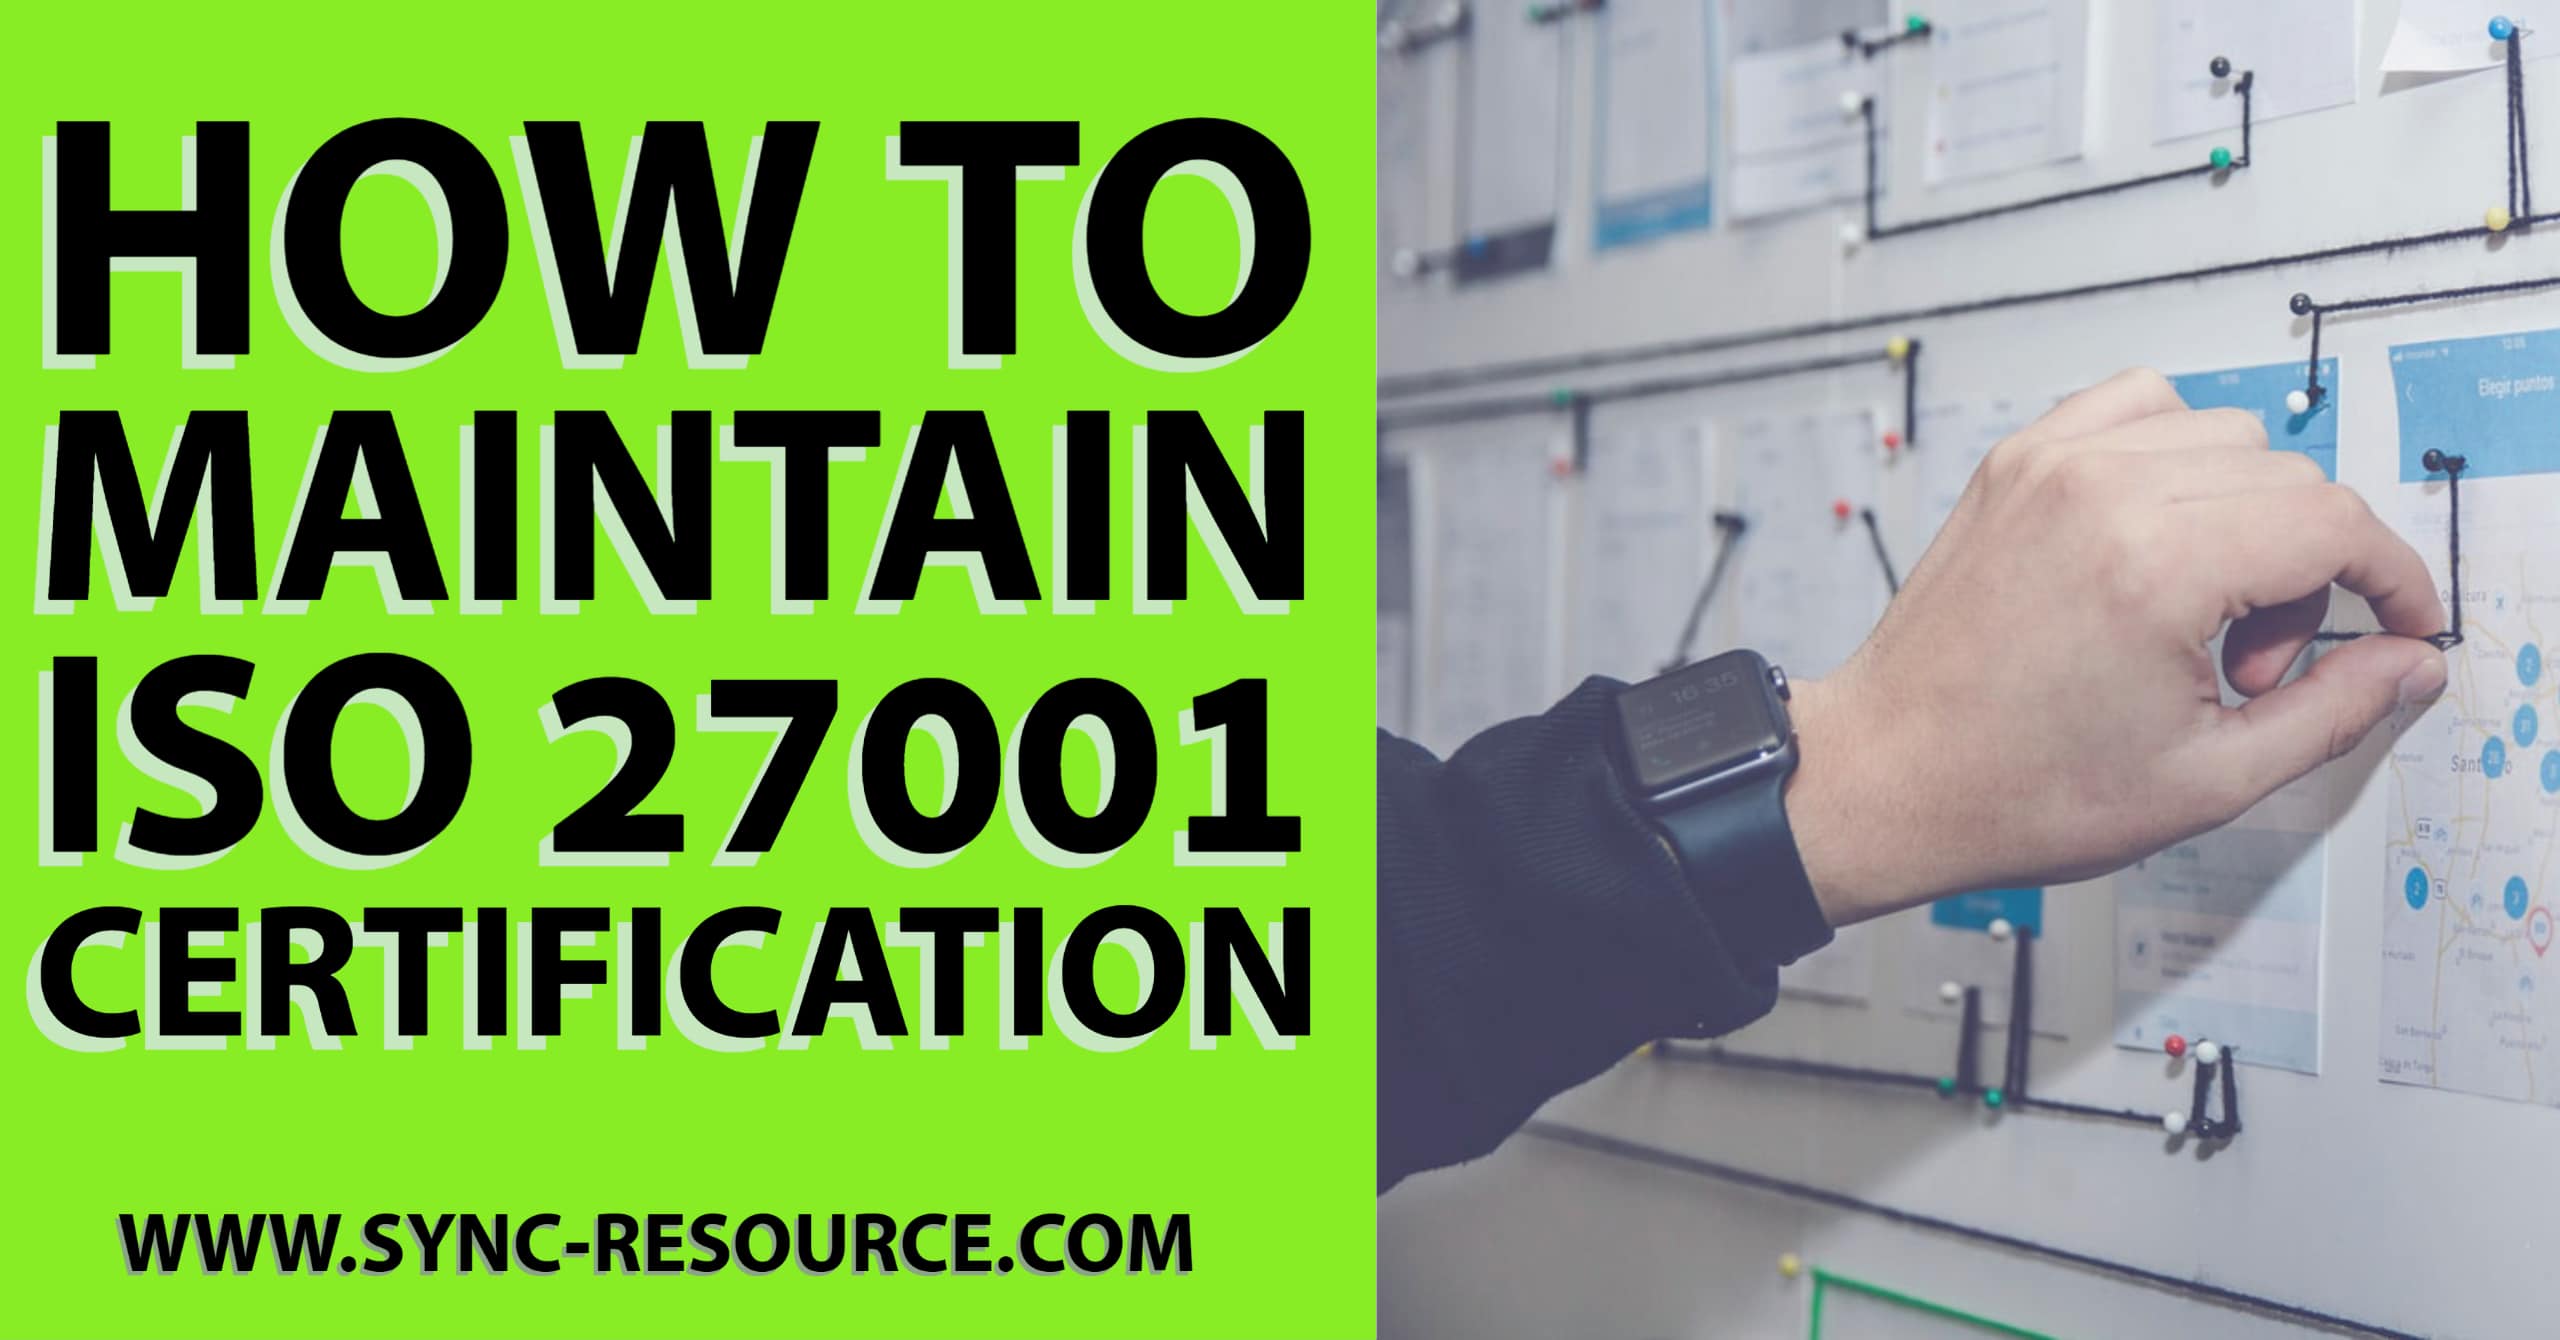 How To Maintain ISO 27001 Certification